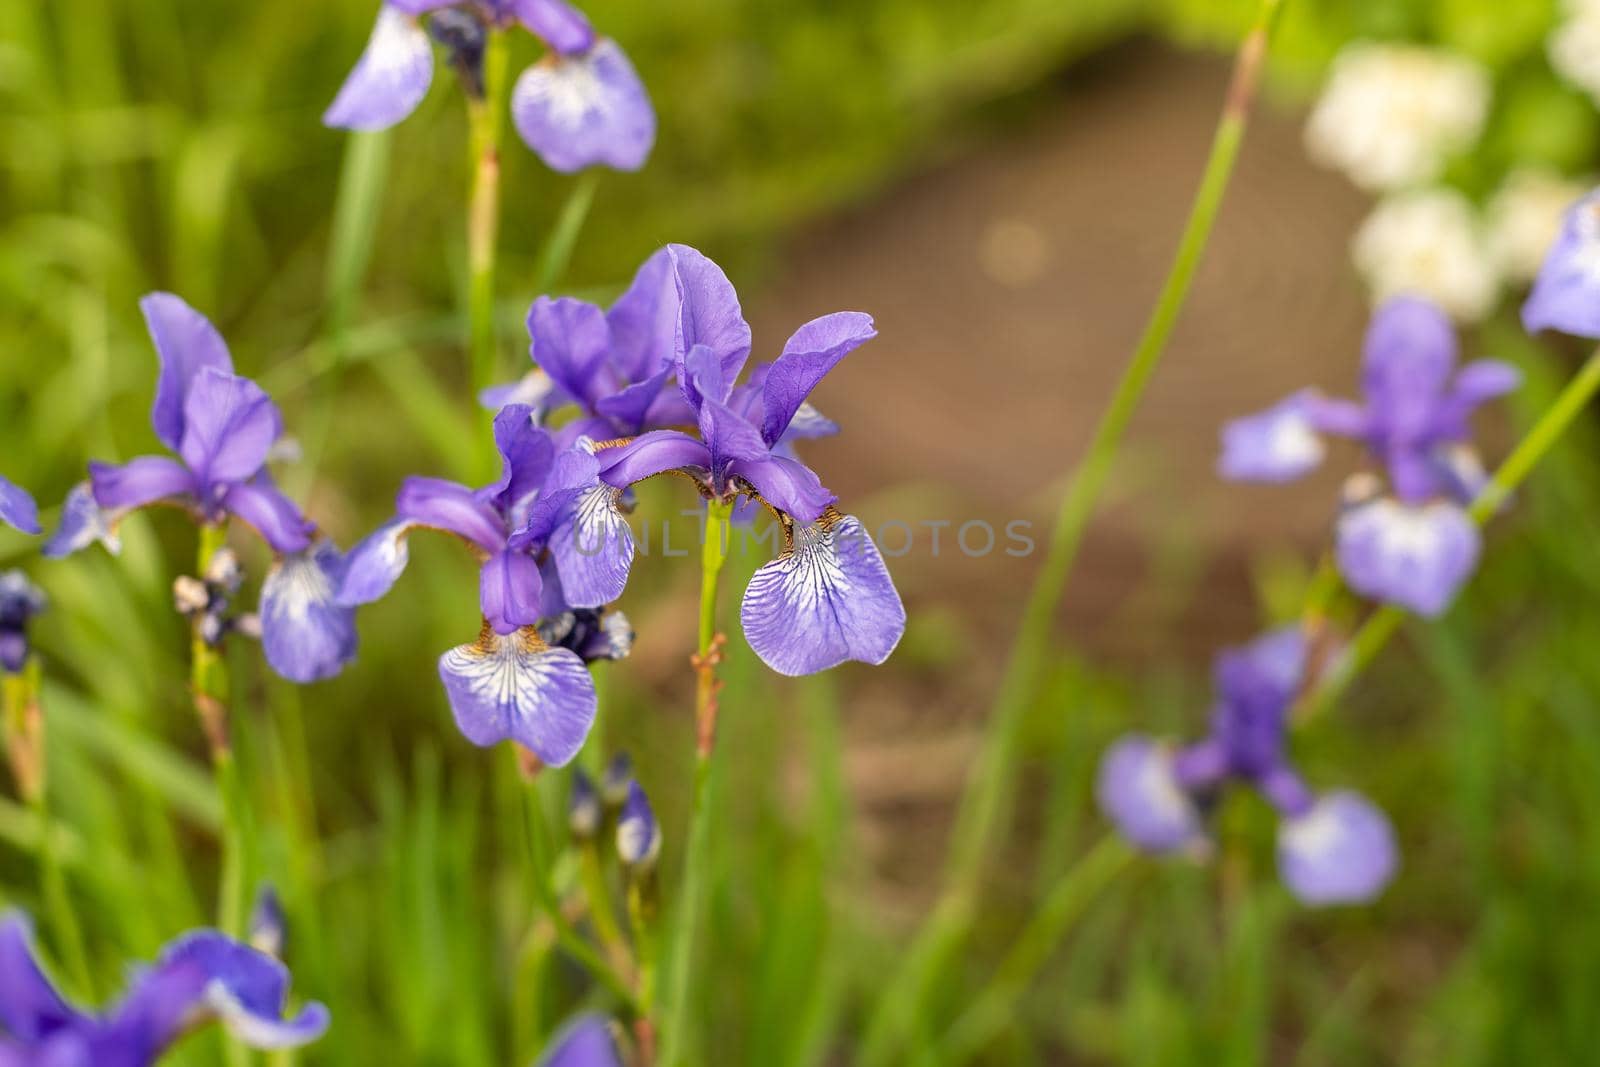 Delicate blue iris flowers on a flower bed in the park by Andelov13